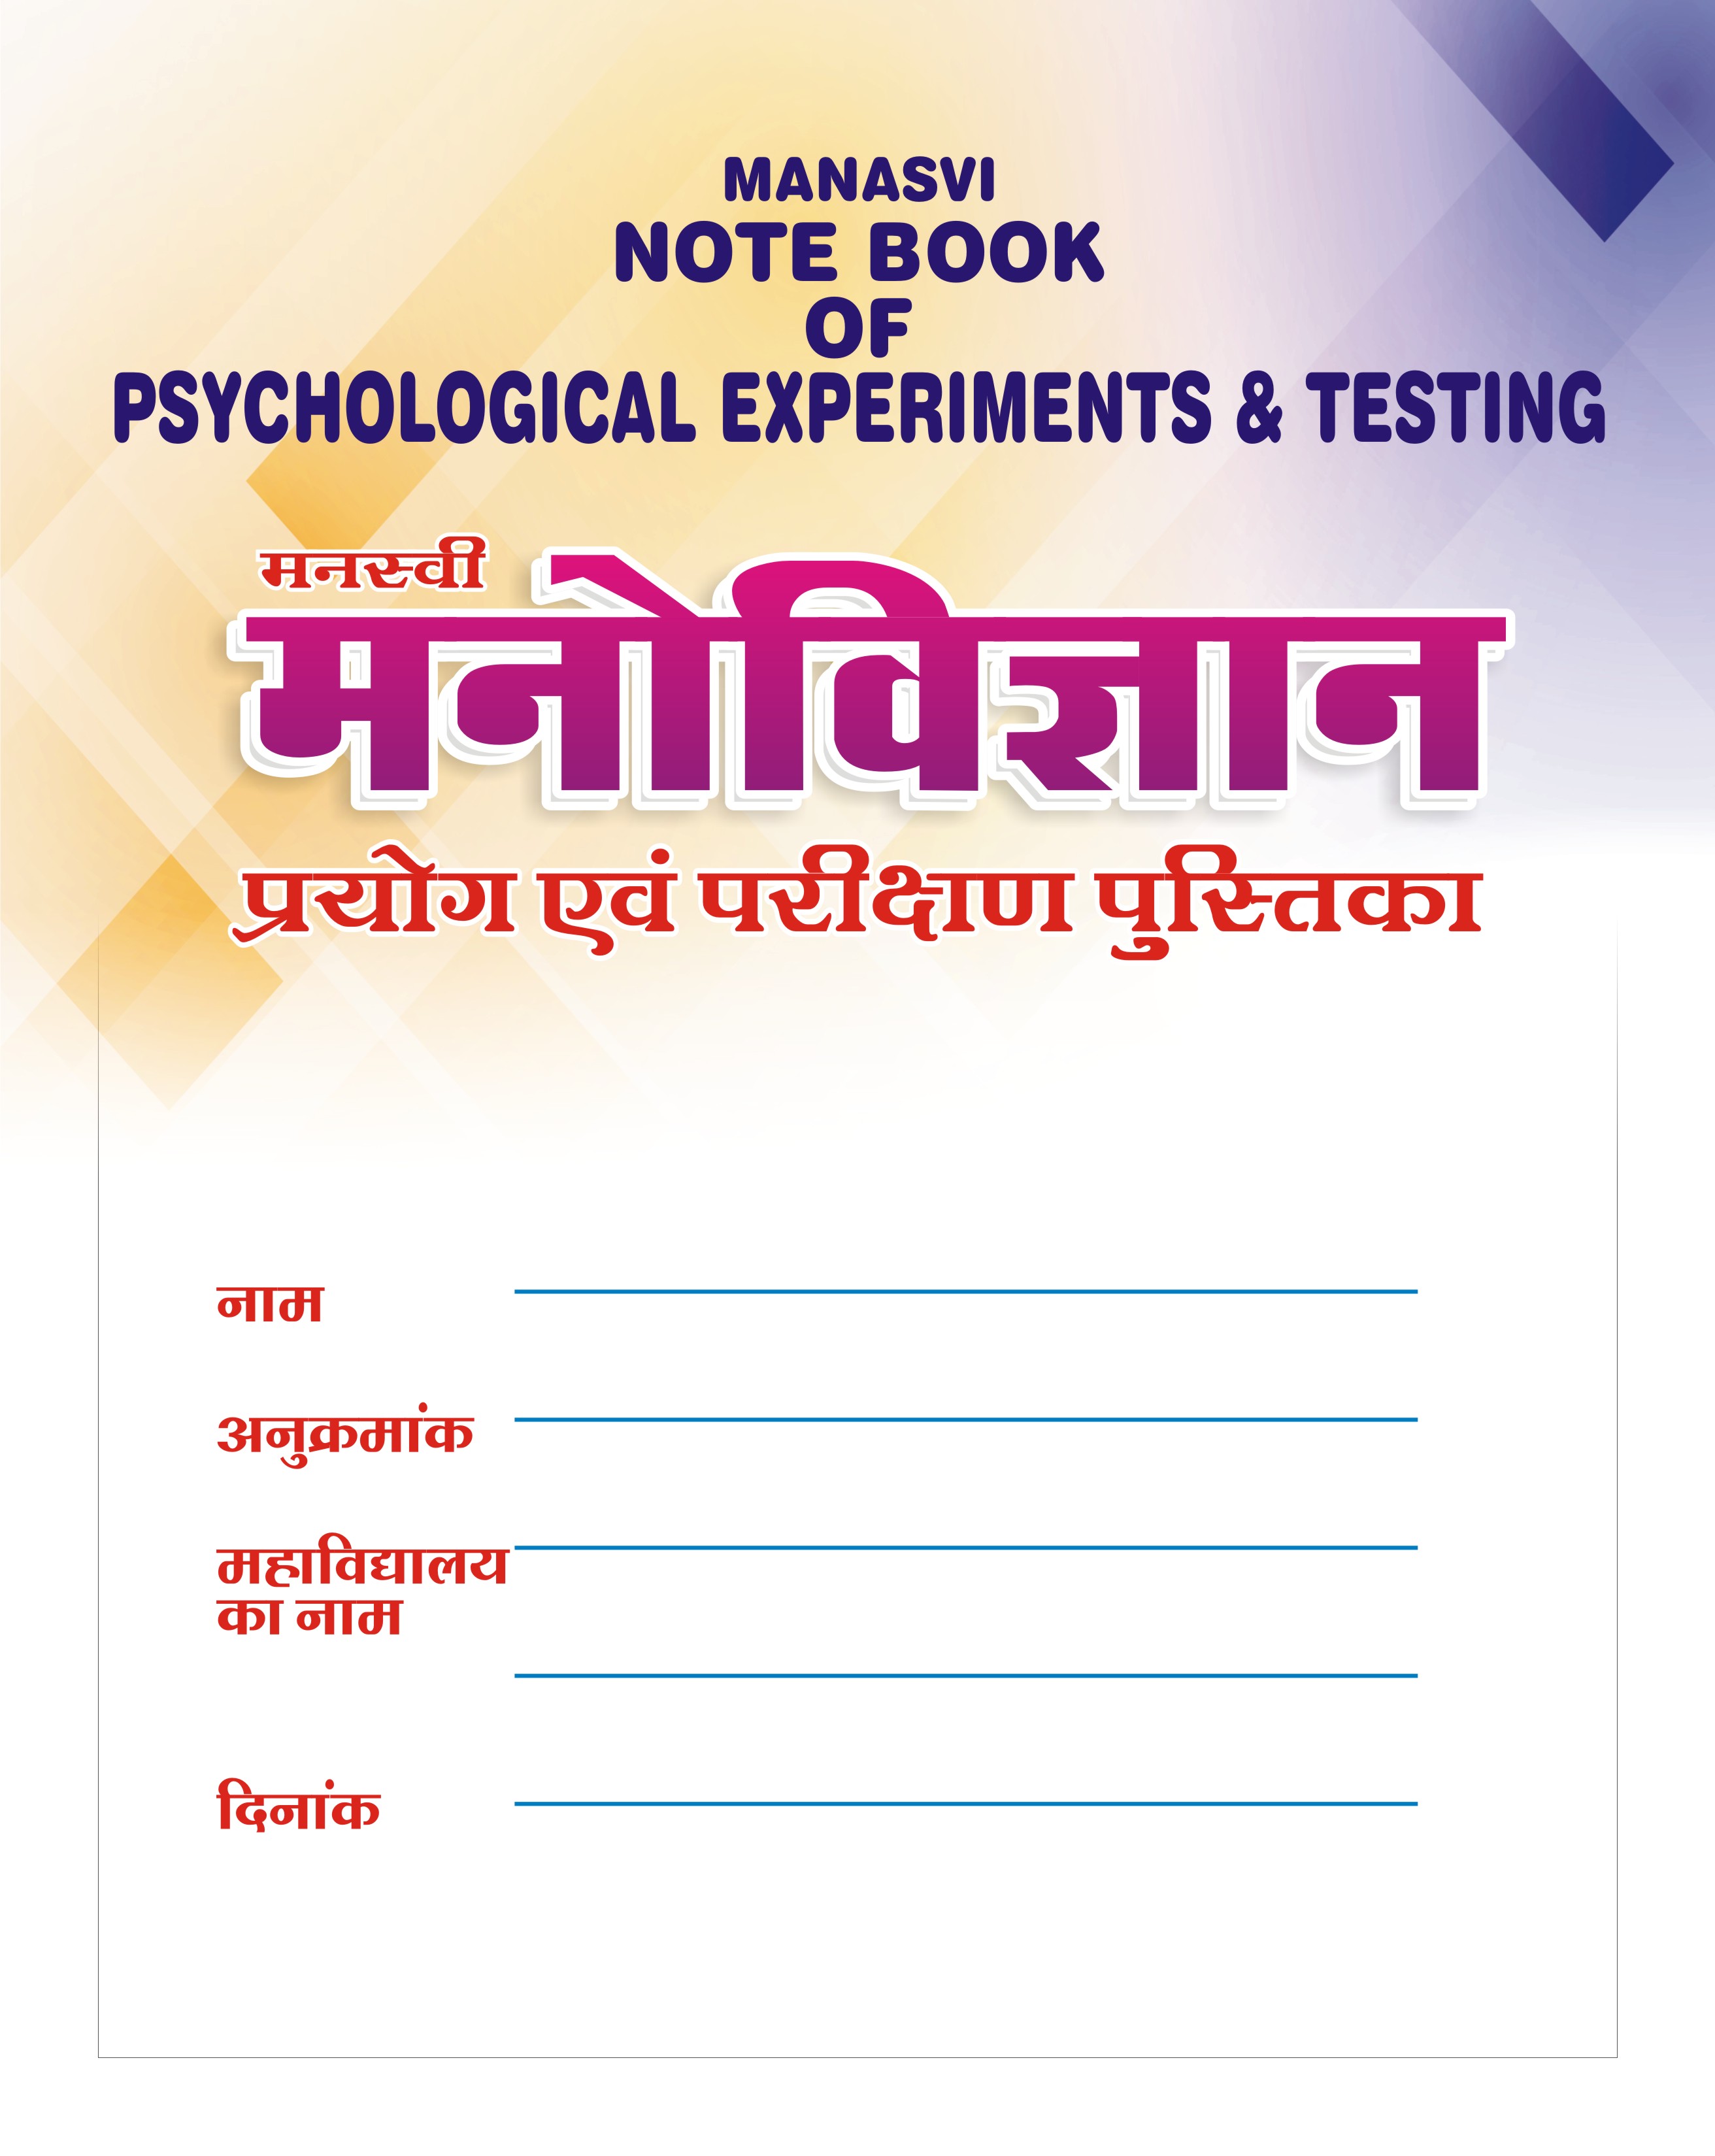 MANASVI-NOTE-BOOK-OF-PSYCHOLOGICAL-EXPERIMENTS-TESTING